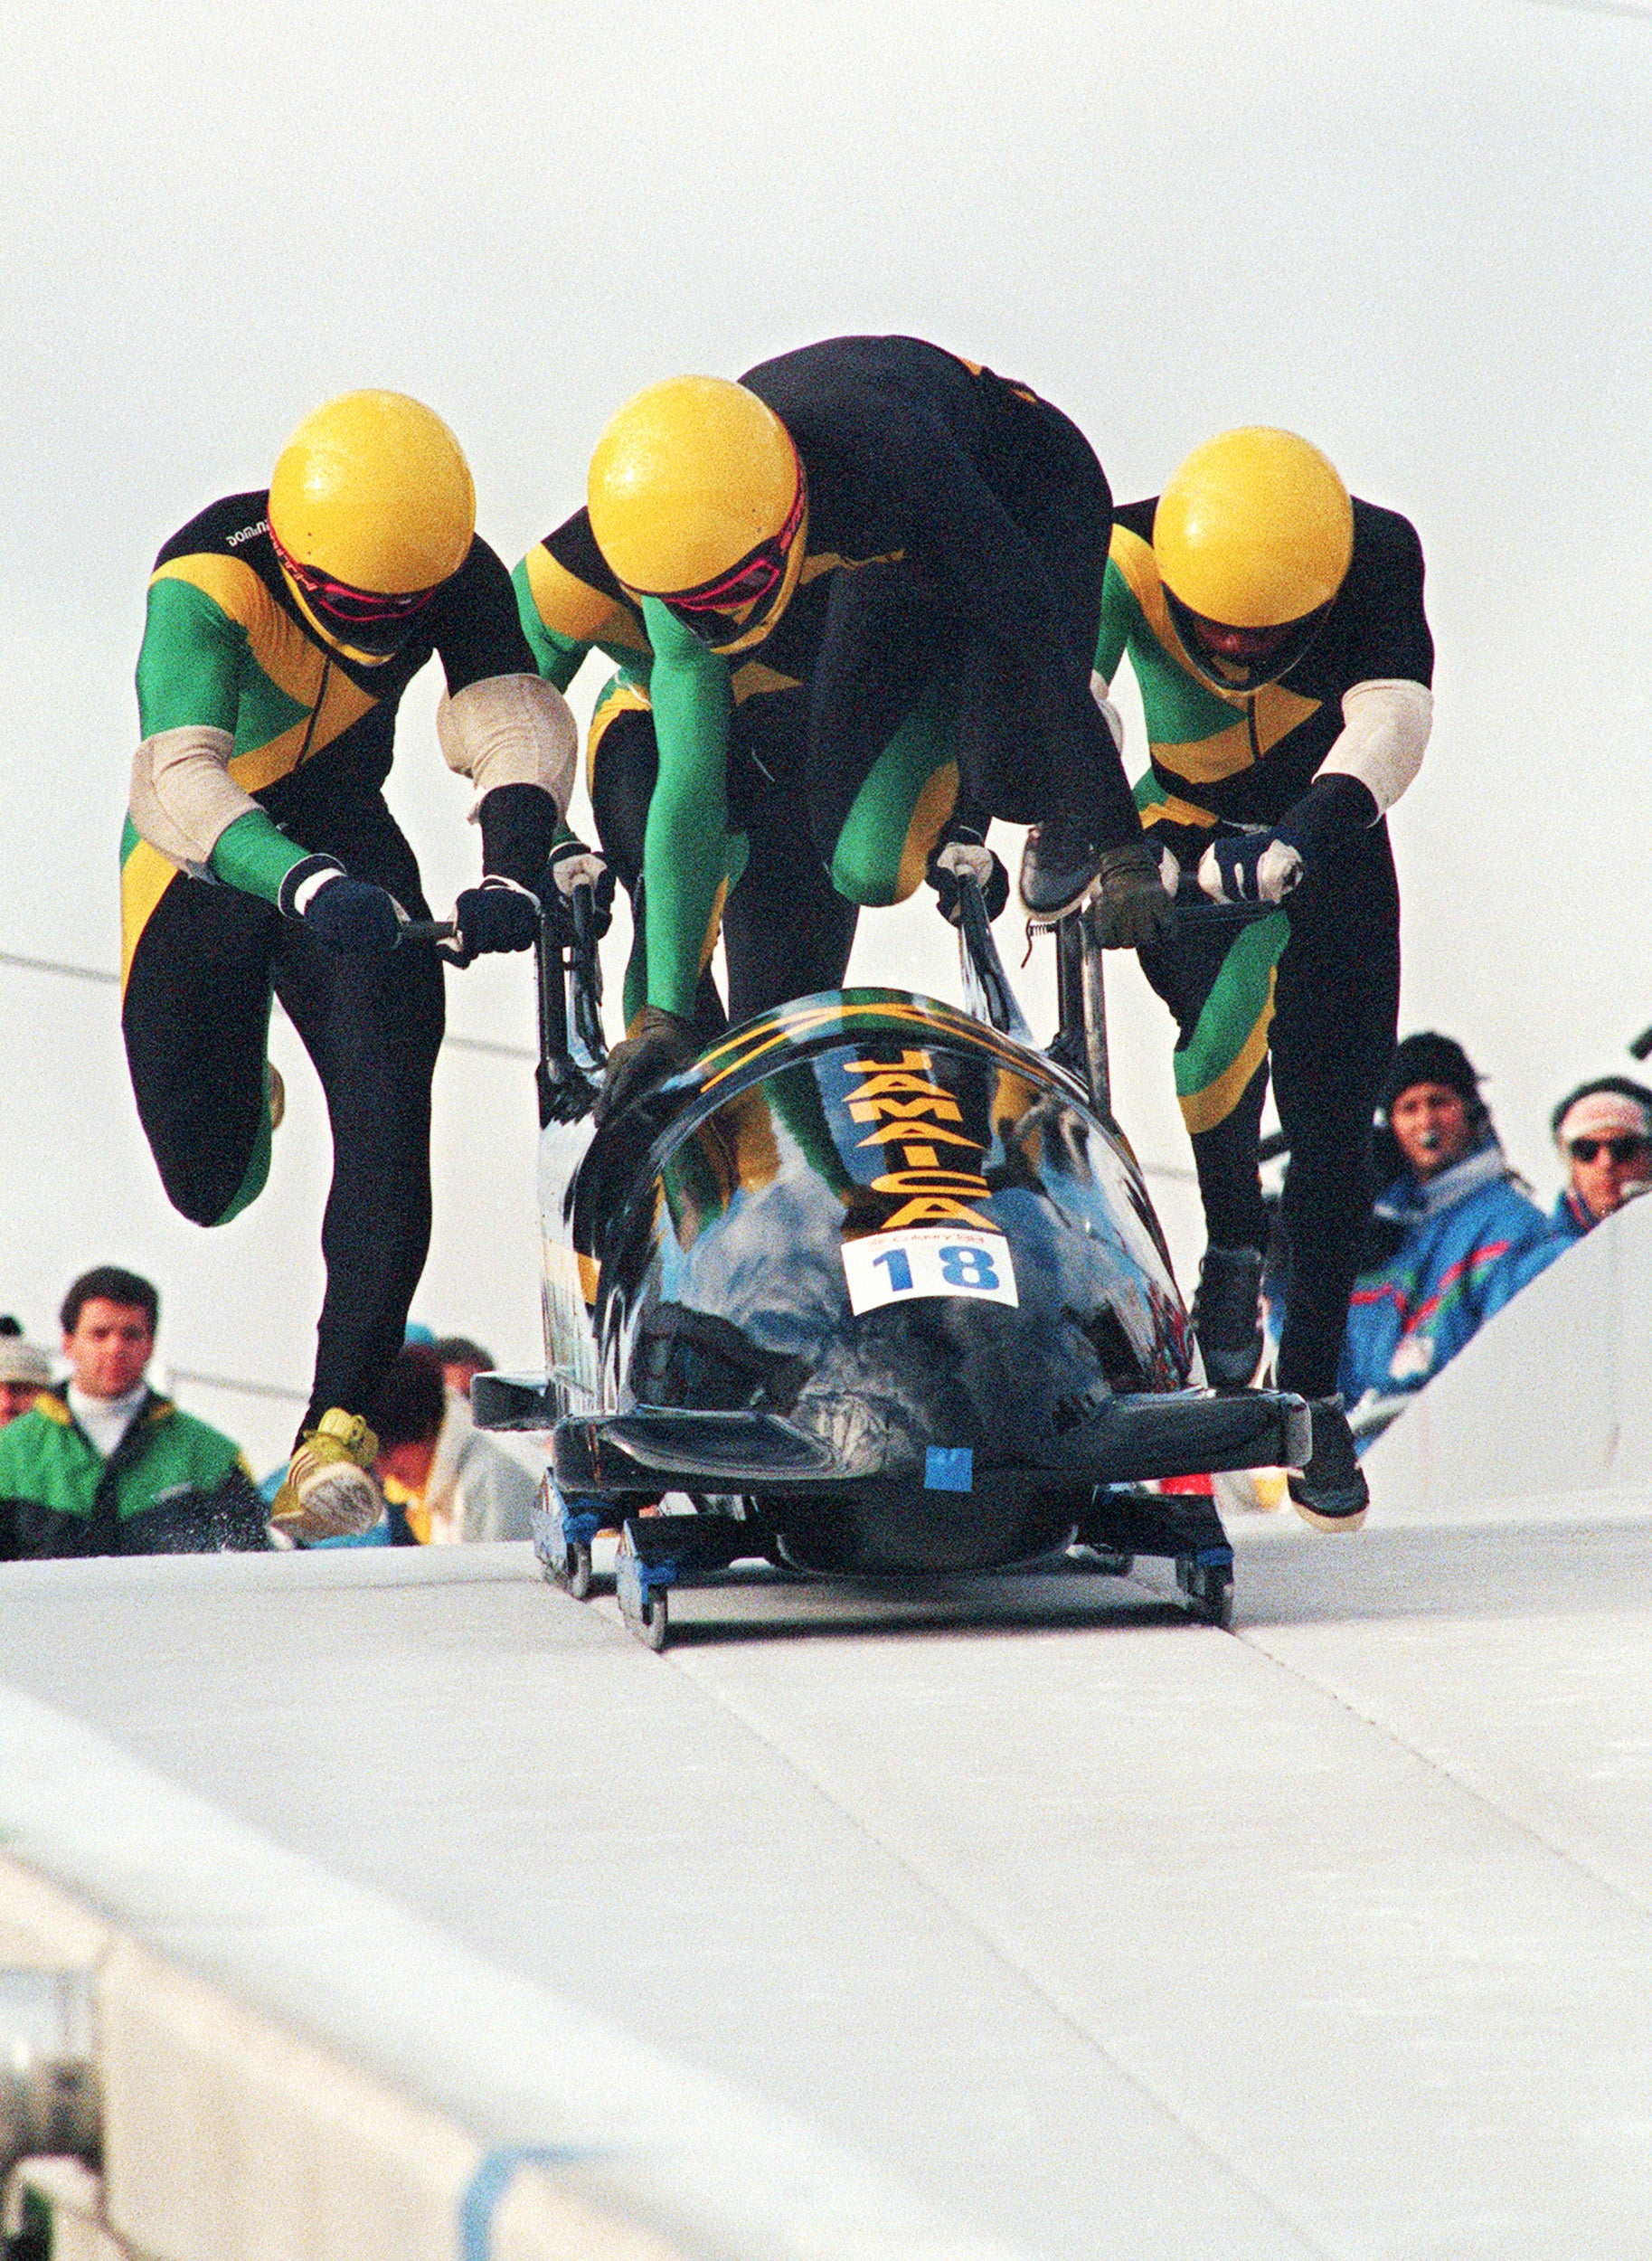 Dudley Stokes jumps in as his three teammates push off at the start in 1988